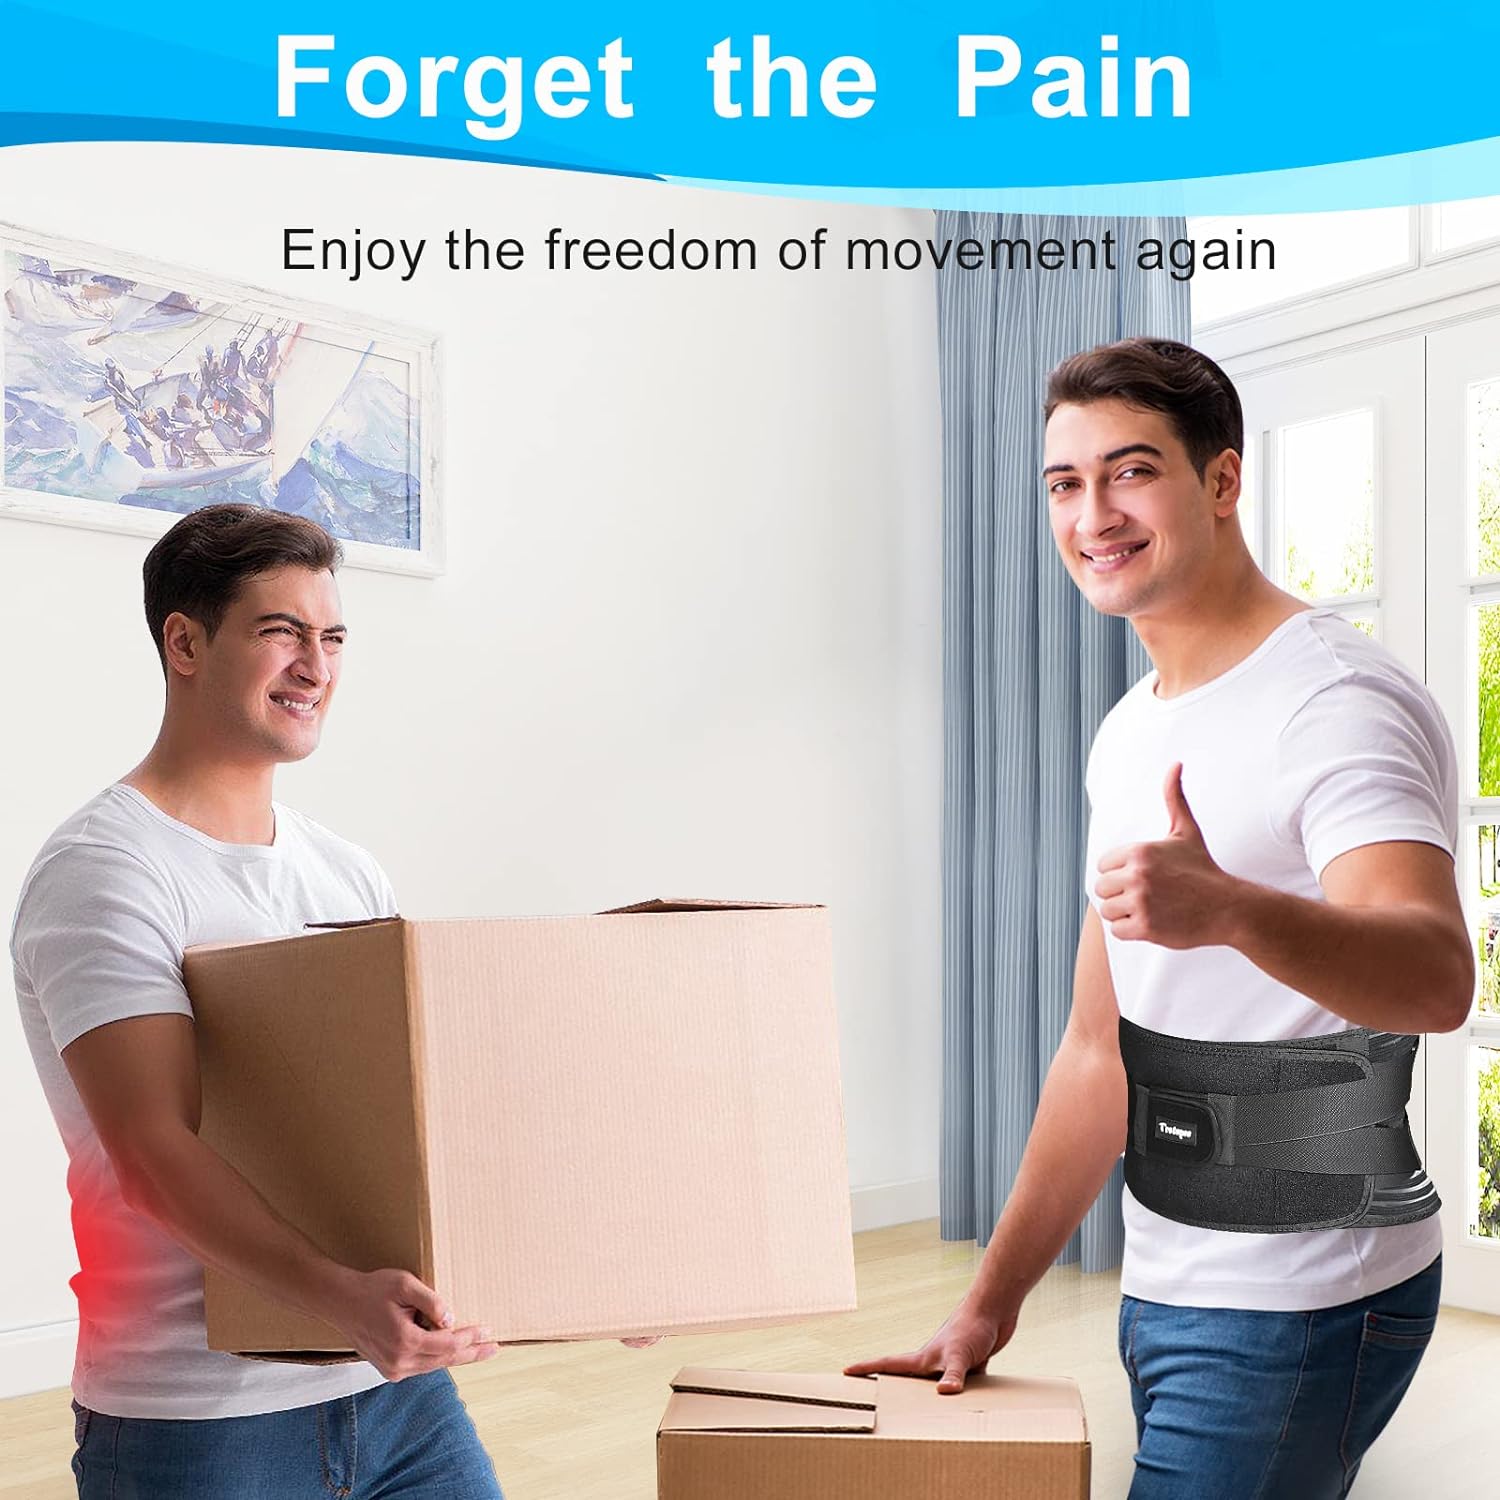 Generic 2022 Upgrade Back Brace for Men Women Lower Back Pain Relief with 7 Stays and Removable Lumbar Pad - Breathable Air Mesh Anti-s